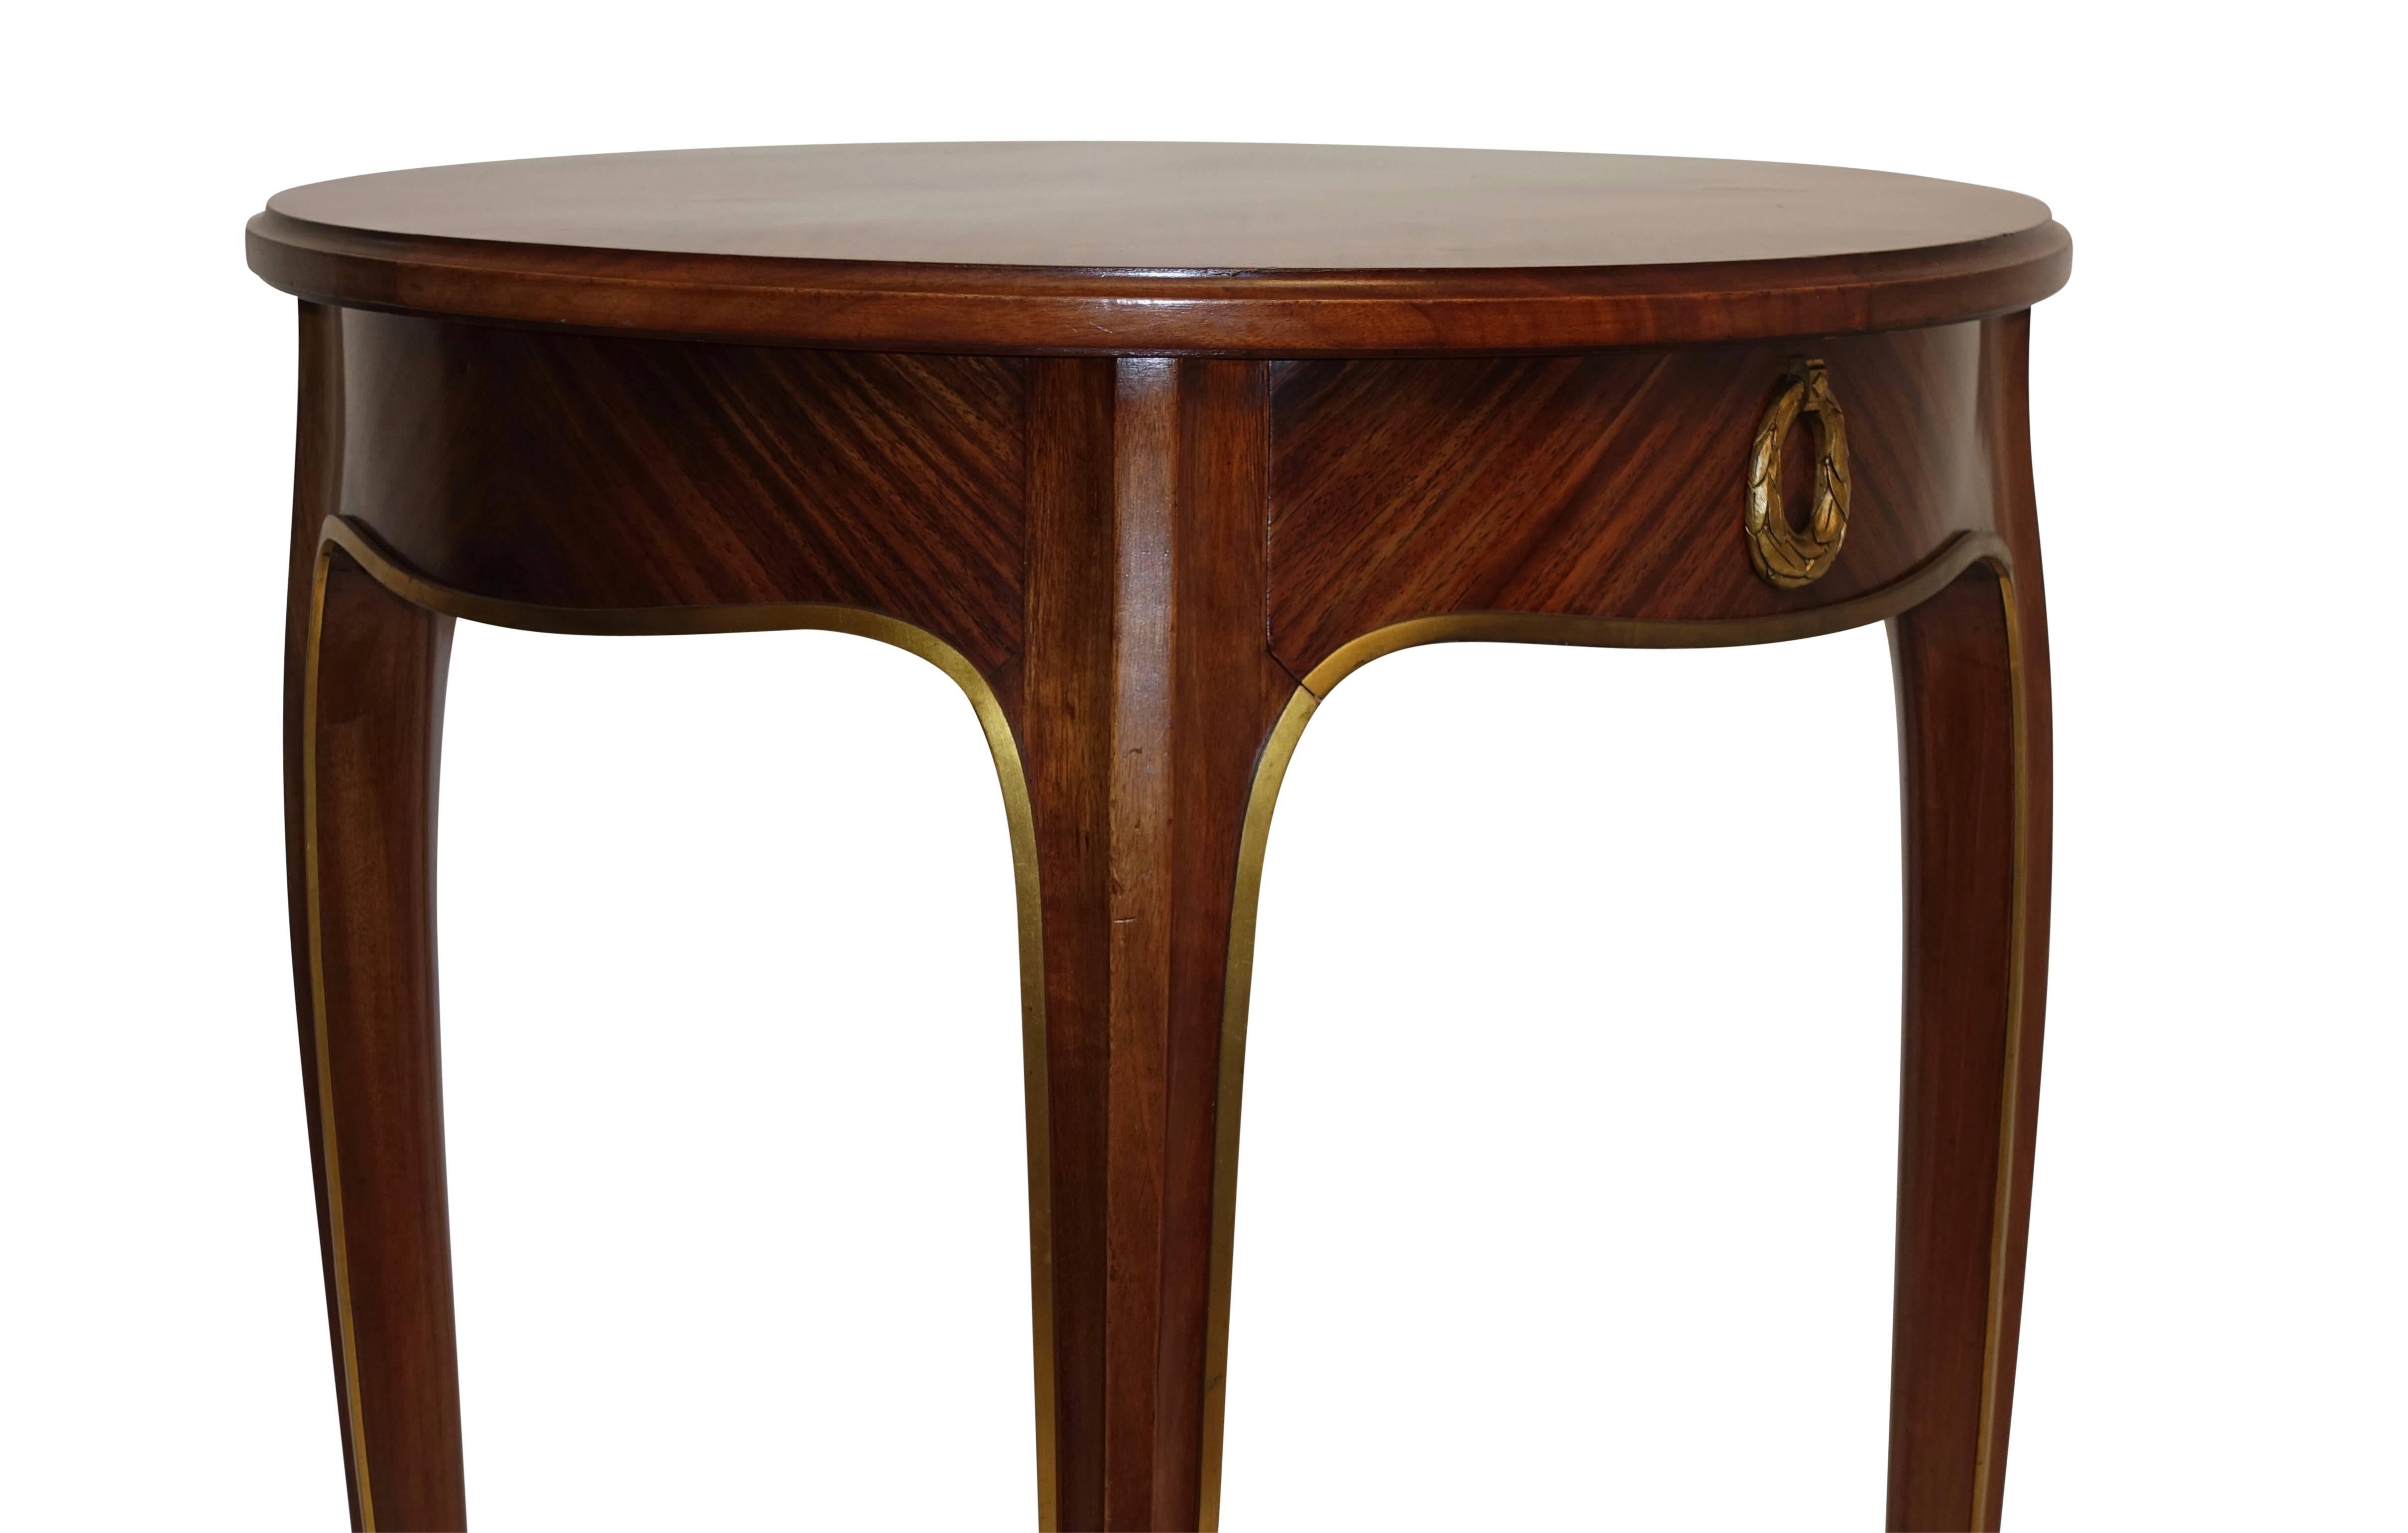 20th Century Louis XVI Style Mahogany Side Table with Drawer, French Early 20th century For Sale